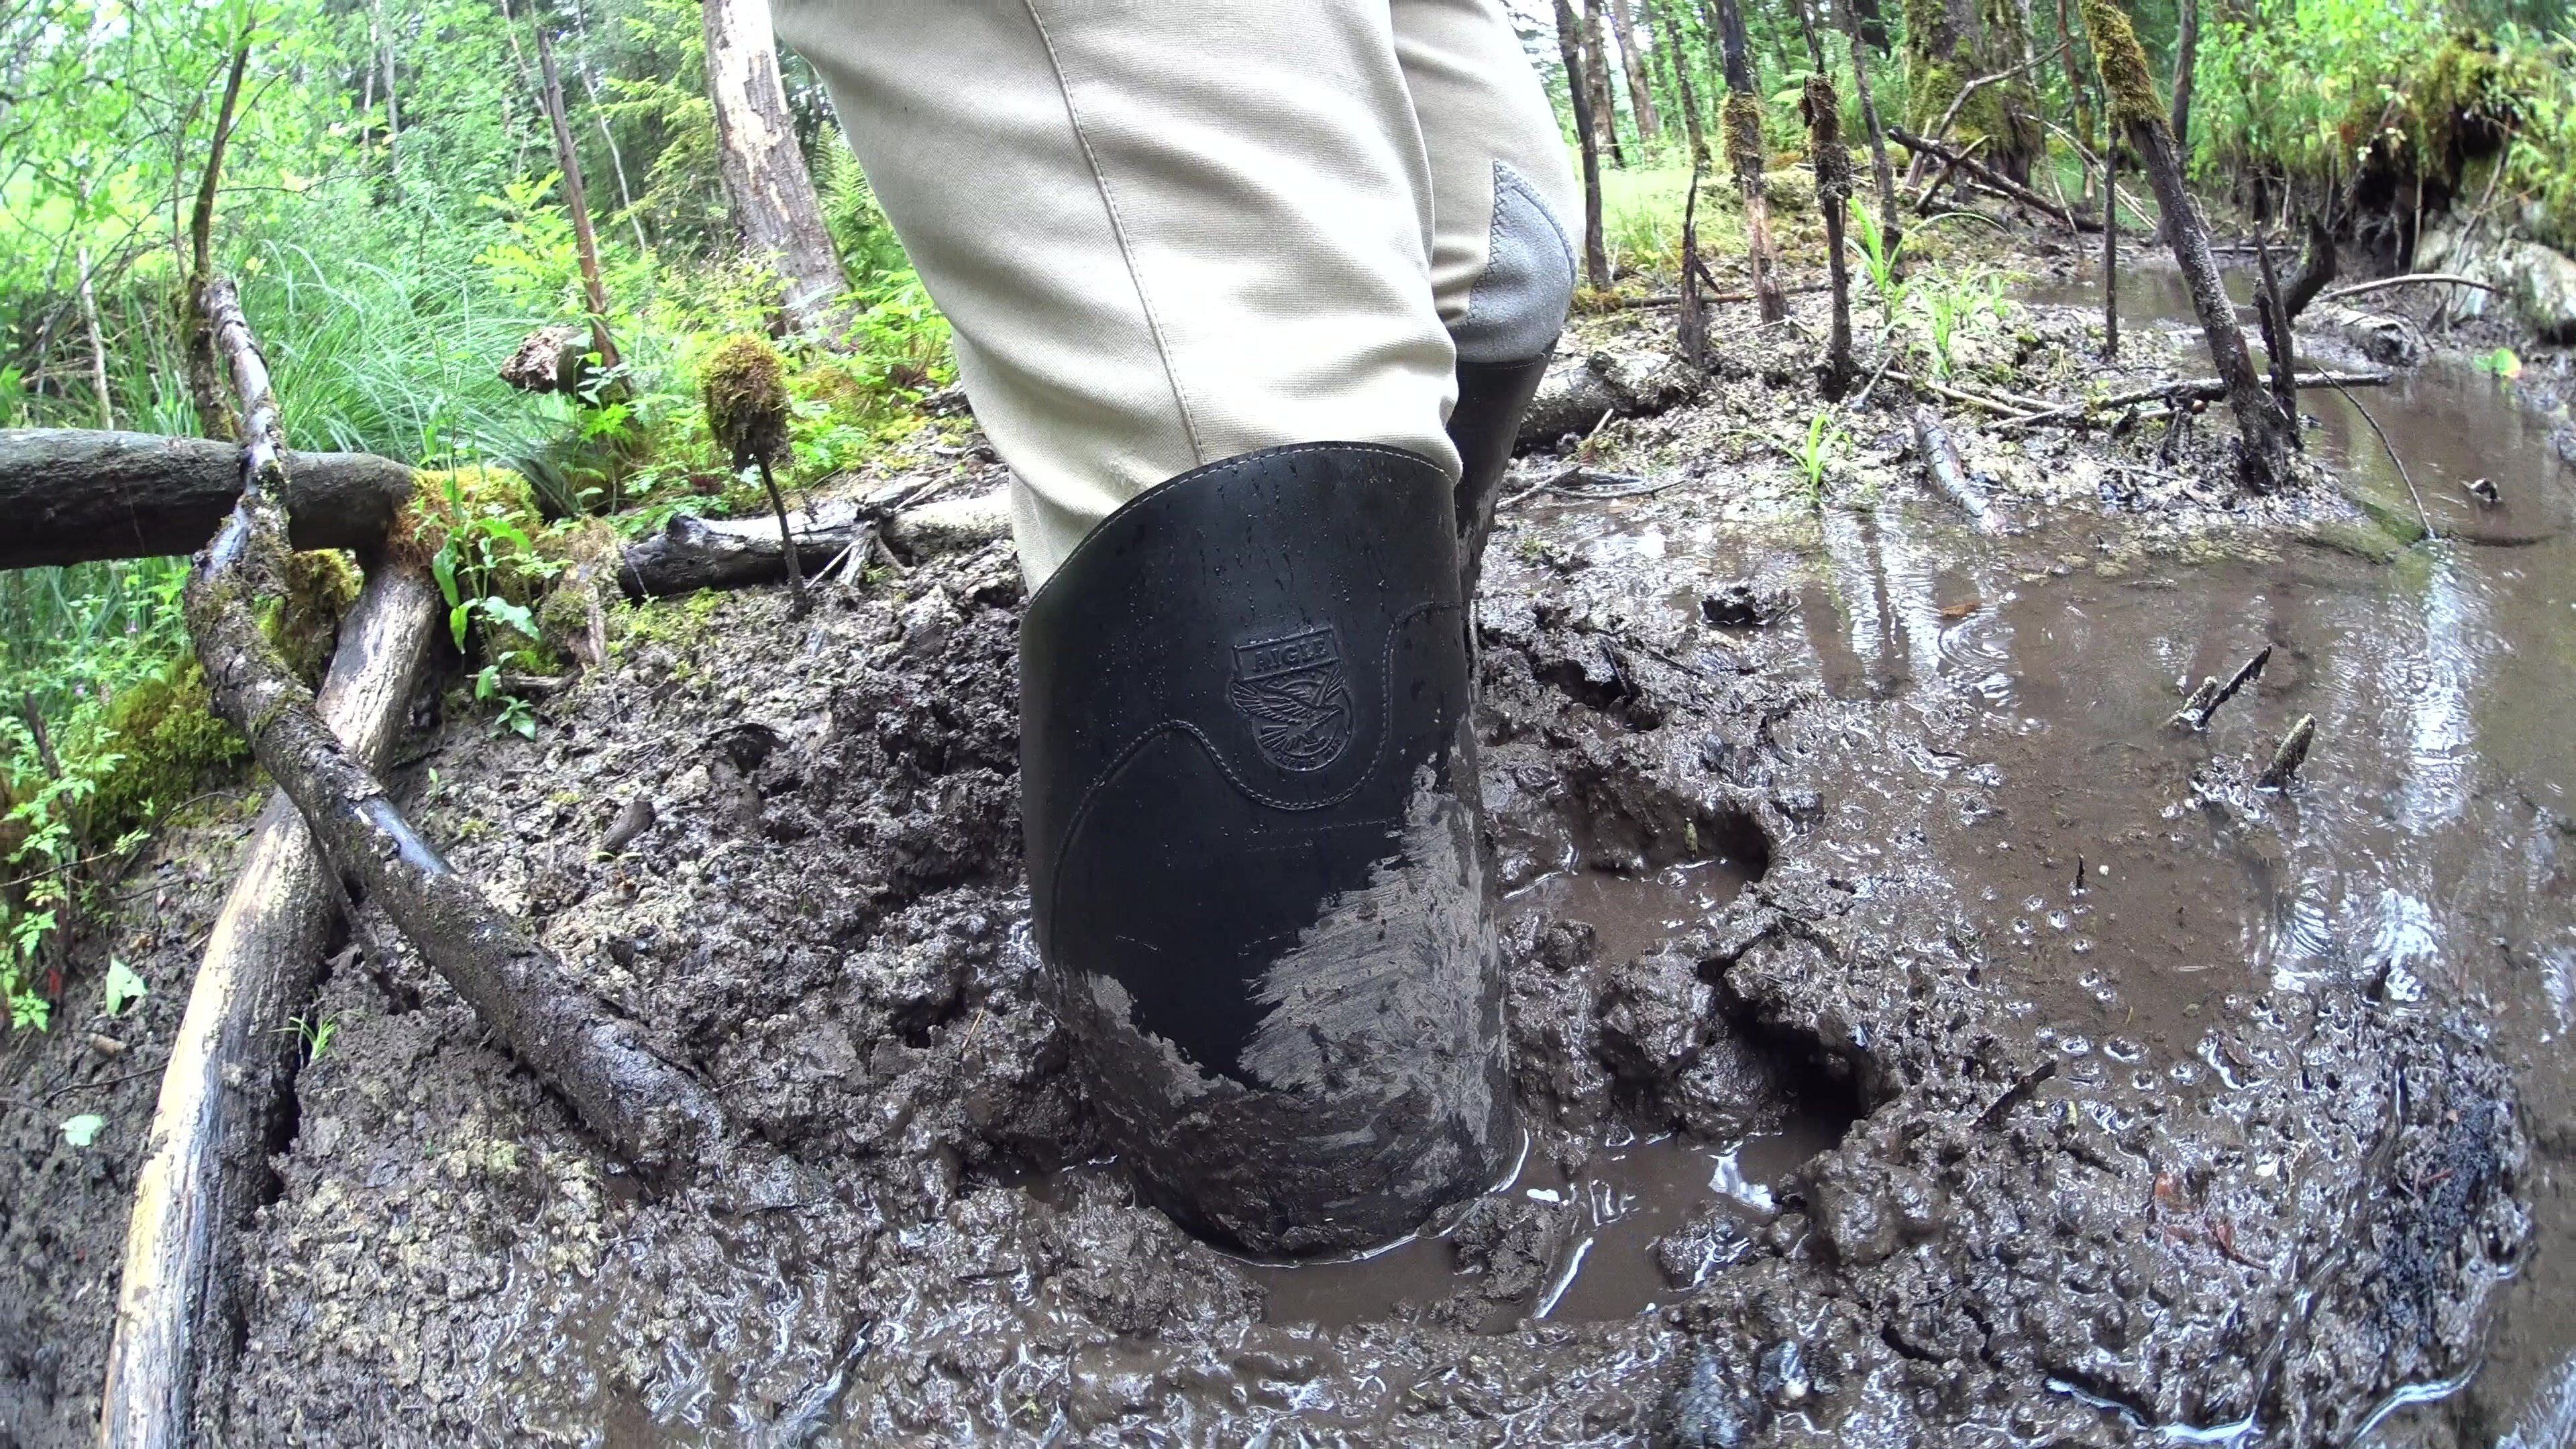 Ridingboots in Mud